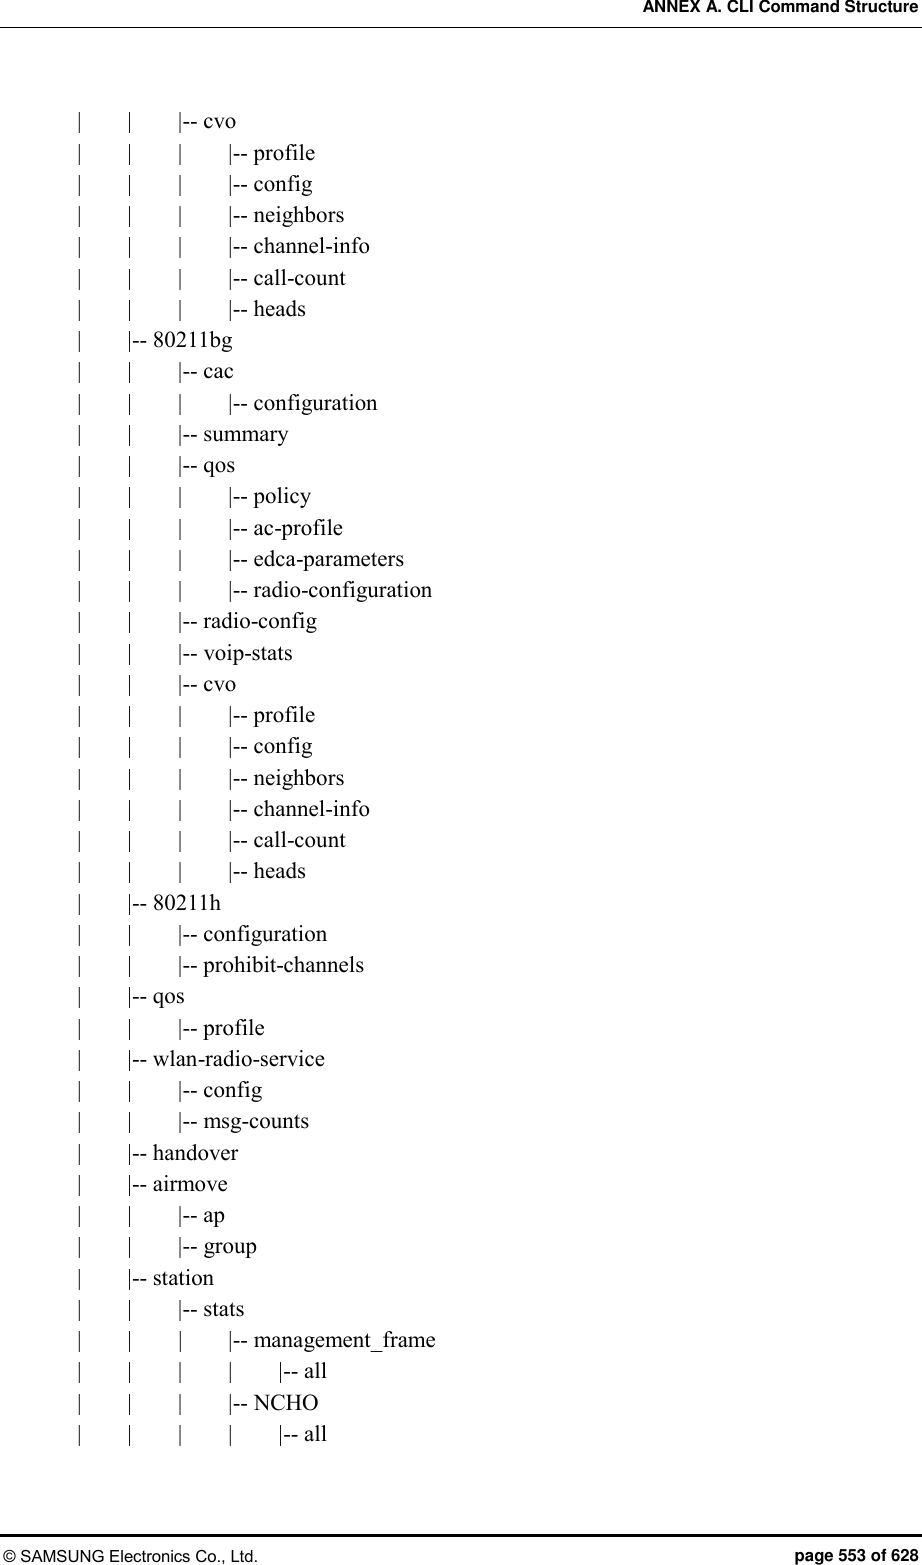 ANNEX A. CLI Command Structure © SAMSUNG Electronics Co., Ltd.  page 553 of 628 |        |        |-- cvo |        |        |        |-- profile |        |        |        |-- config |        |        |        |-- neighbors |        |        |        |-- channel-info |        |        |        |-- call-count |        |        |        |-- heads |        |-- 80211bg |        |        |-- cac |        |        |        |-- configuration |        |        |-- summary |        |        |-- qos |        |        |        |-- policy |        |        |        |-- ac-profile |        |        |        |-- edca-parameters |        |        |        |-- radio-configuration |        |        |-- radio-config |        |        |-- voip-stats |        |        |-- cvo |        |        |        |-- profile |        |        |        |-- config |        |        |        |-- neighbors |        |        |        |-- channel-info |        |        |        |-- call-count |        |        |        |-- heads |        |-- 80211h |        |        |-- configuration |        |        |-- prohibit-channels |        |-- qos |        |        |-- profile |        |-- wlan-radio-service |        |        |-- config |        |        |-- msg-counts |        |-- handover |        |-- airmove |        |        |-- ap |        |        |-- group |        |-- station |        |        |-- stats |        |    |        |-- management_frame |        |        |        |        |-- all |        |        |        |-- NCHO |        |        |        |        |-- all 